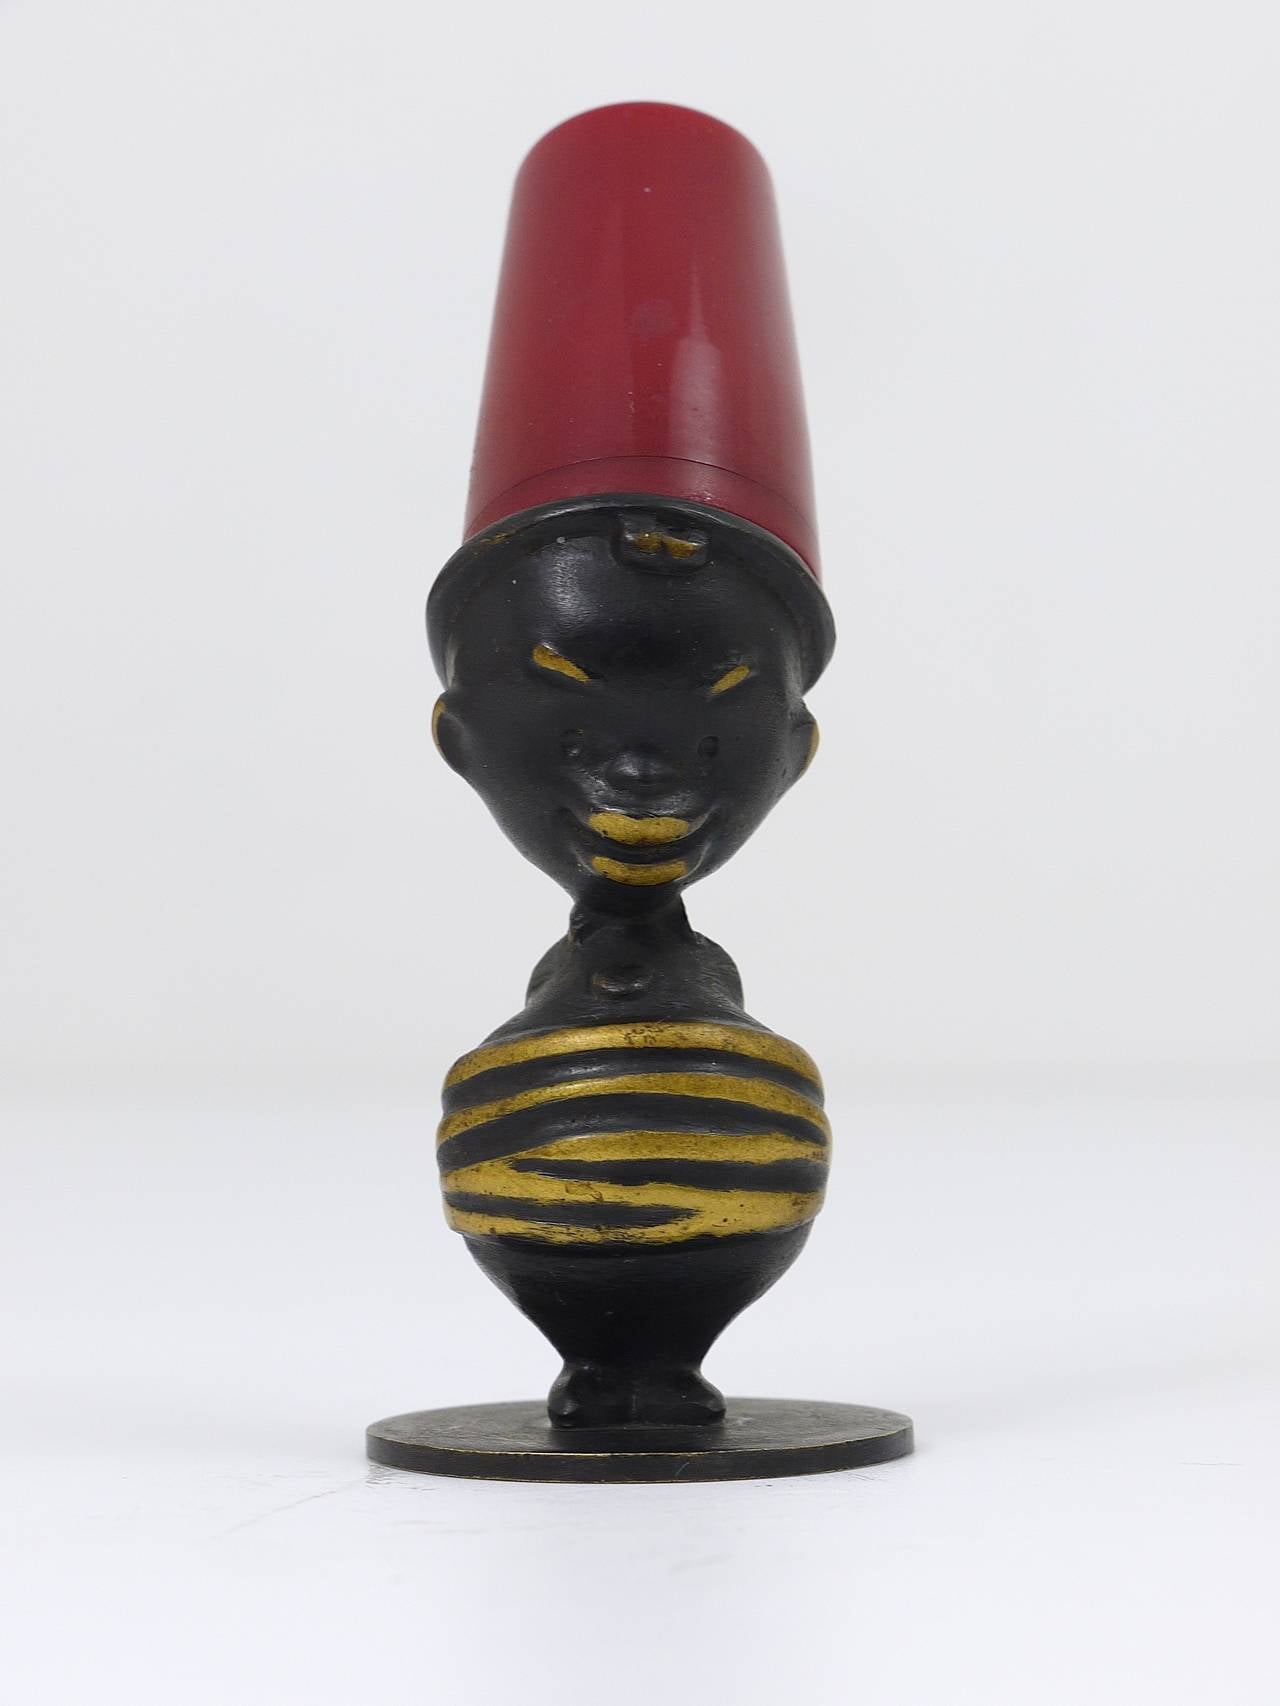 A unusual Viennese modernist salt shaker, designed and executed in the 1950s by Richard Rohac, who worked also for WHW Hagenauer Vienna. Made of black-finished brass and red bakelite. In very good condition.